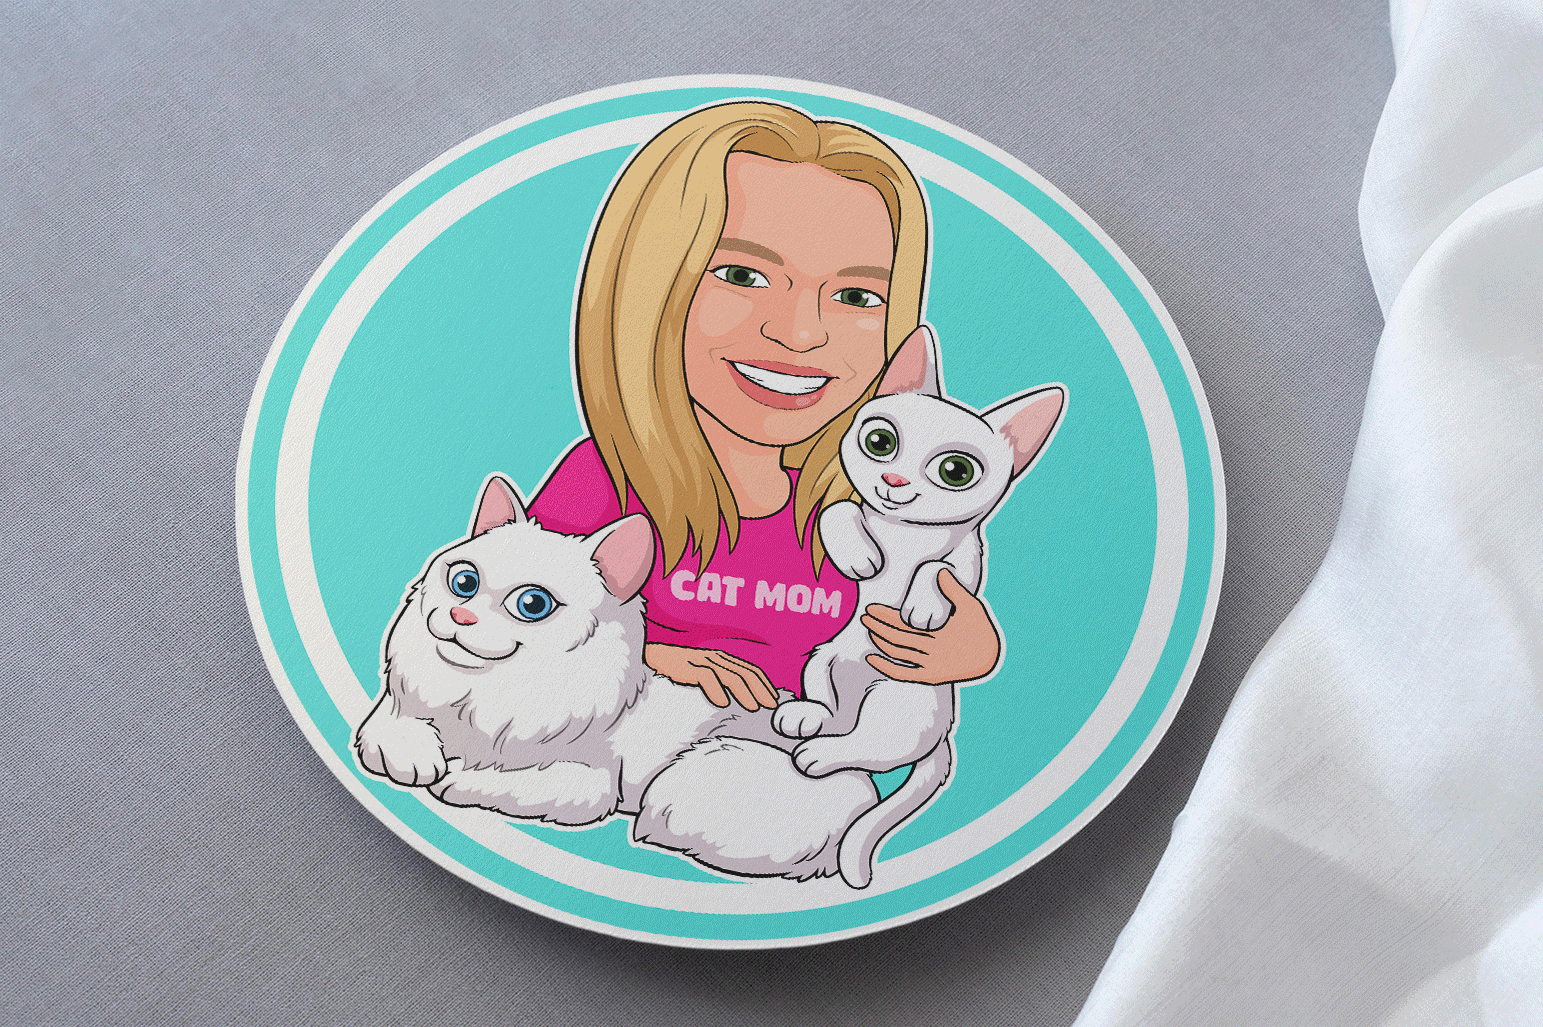 Woman with cats 2d abrang adorable beautiful lady blond woman cartoon cartoon character cartoon profile cat mom cute cat design design character fiverr funny cat hire me illustration logo svg white cat woman with cats